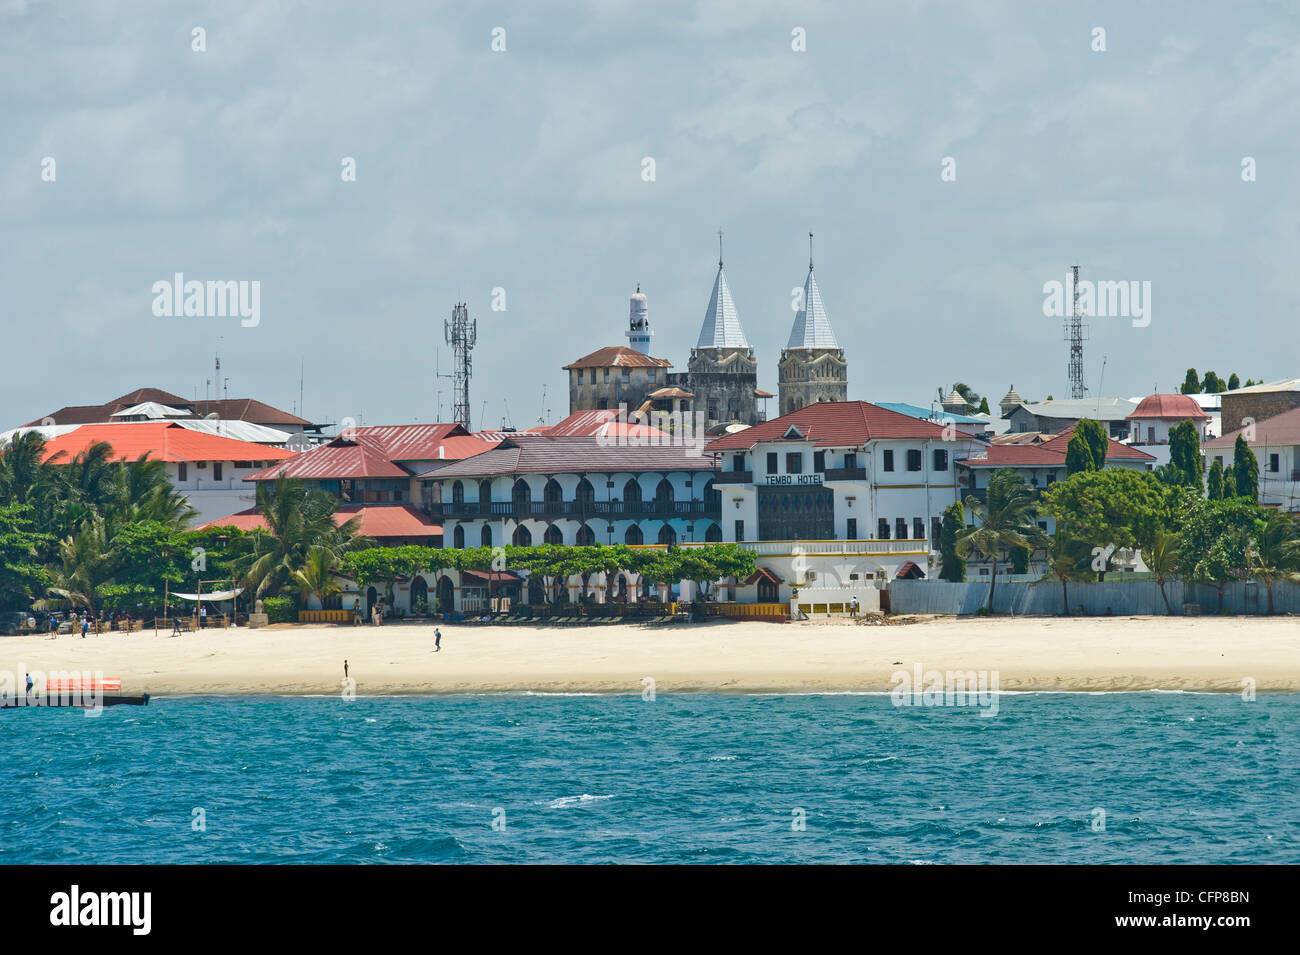 Tembo Hotel and towers of Anglican Cathedral in Stone Town Zanzibar Tanzania Stock Photo